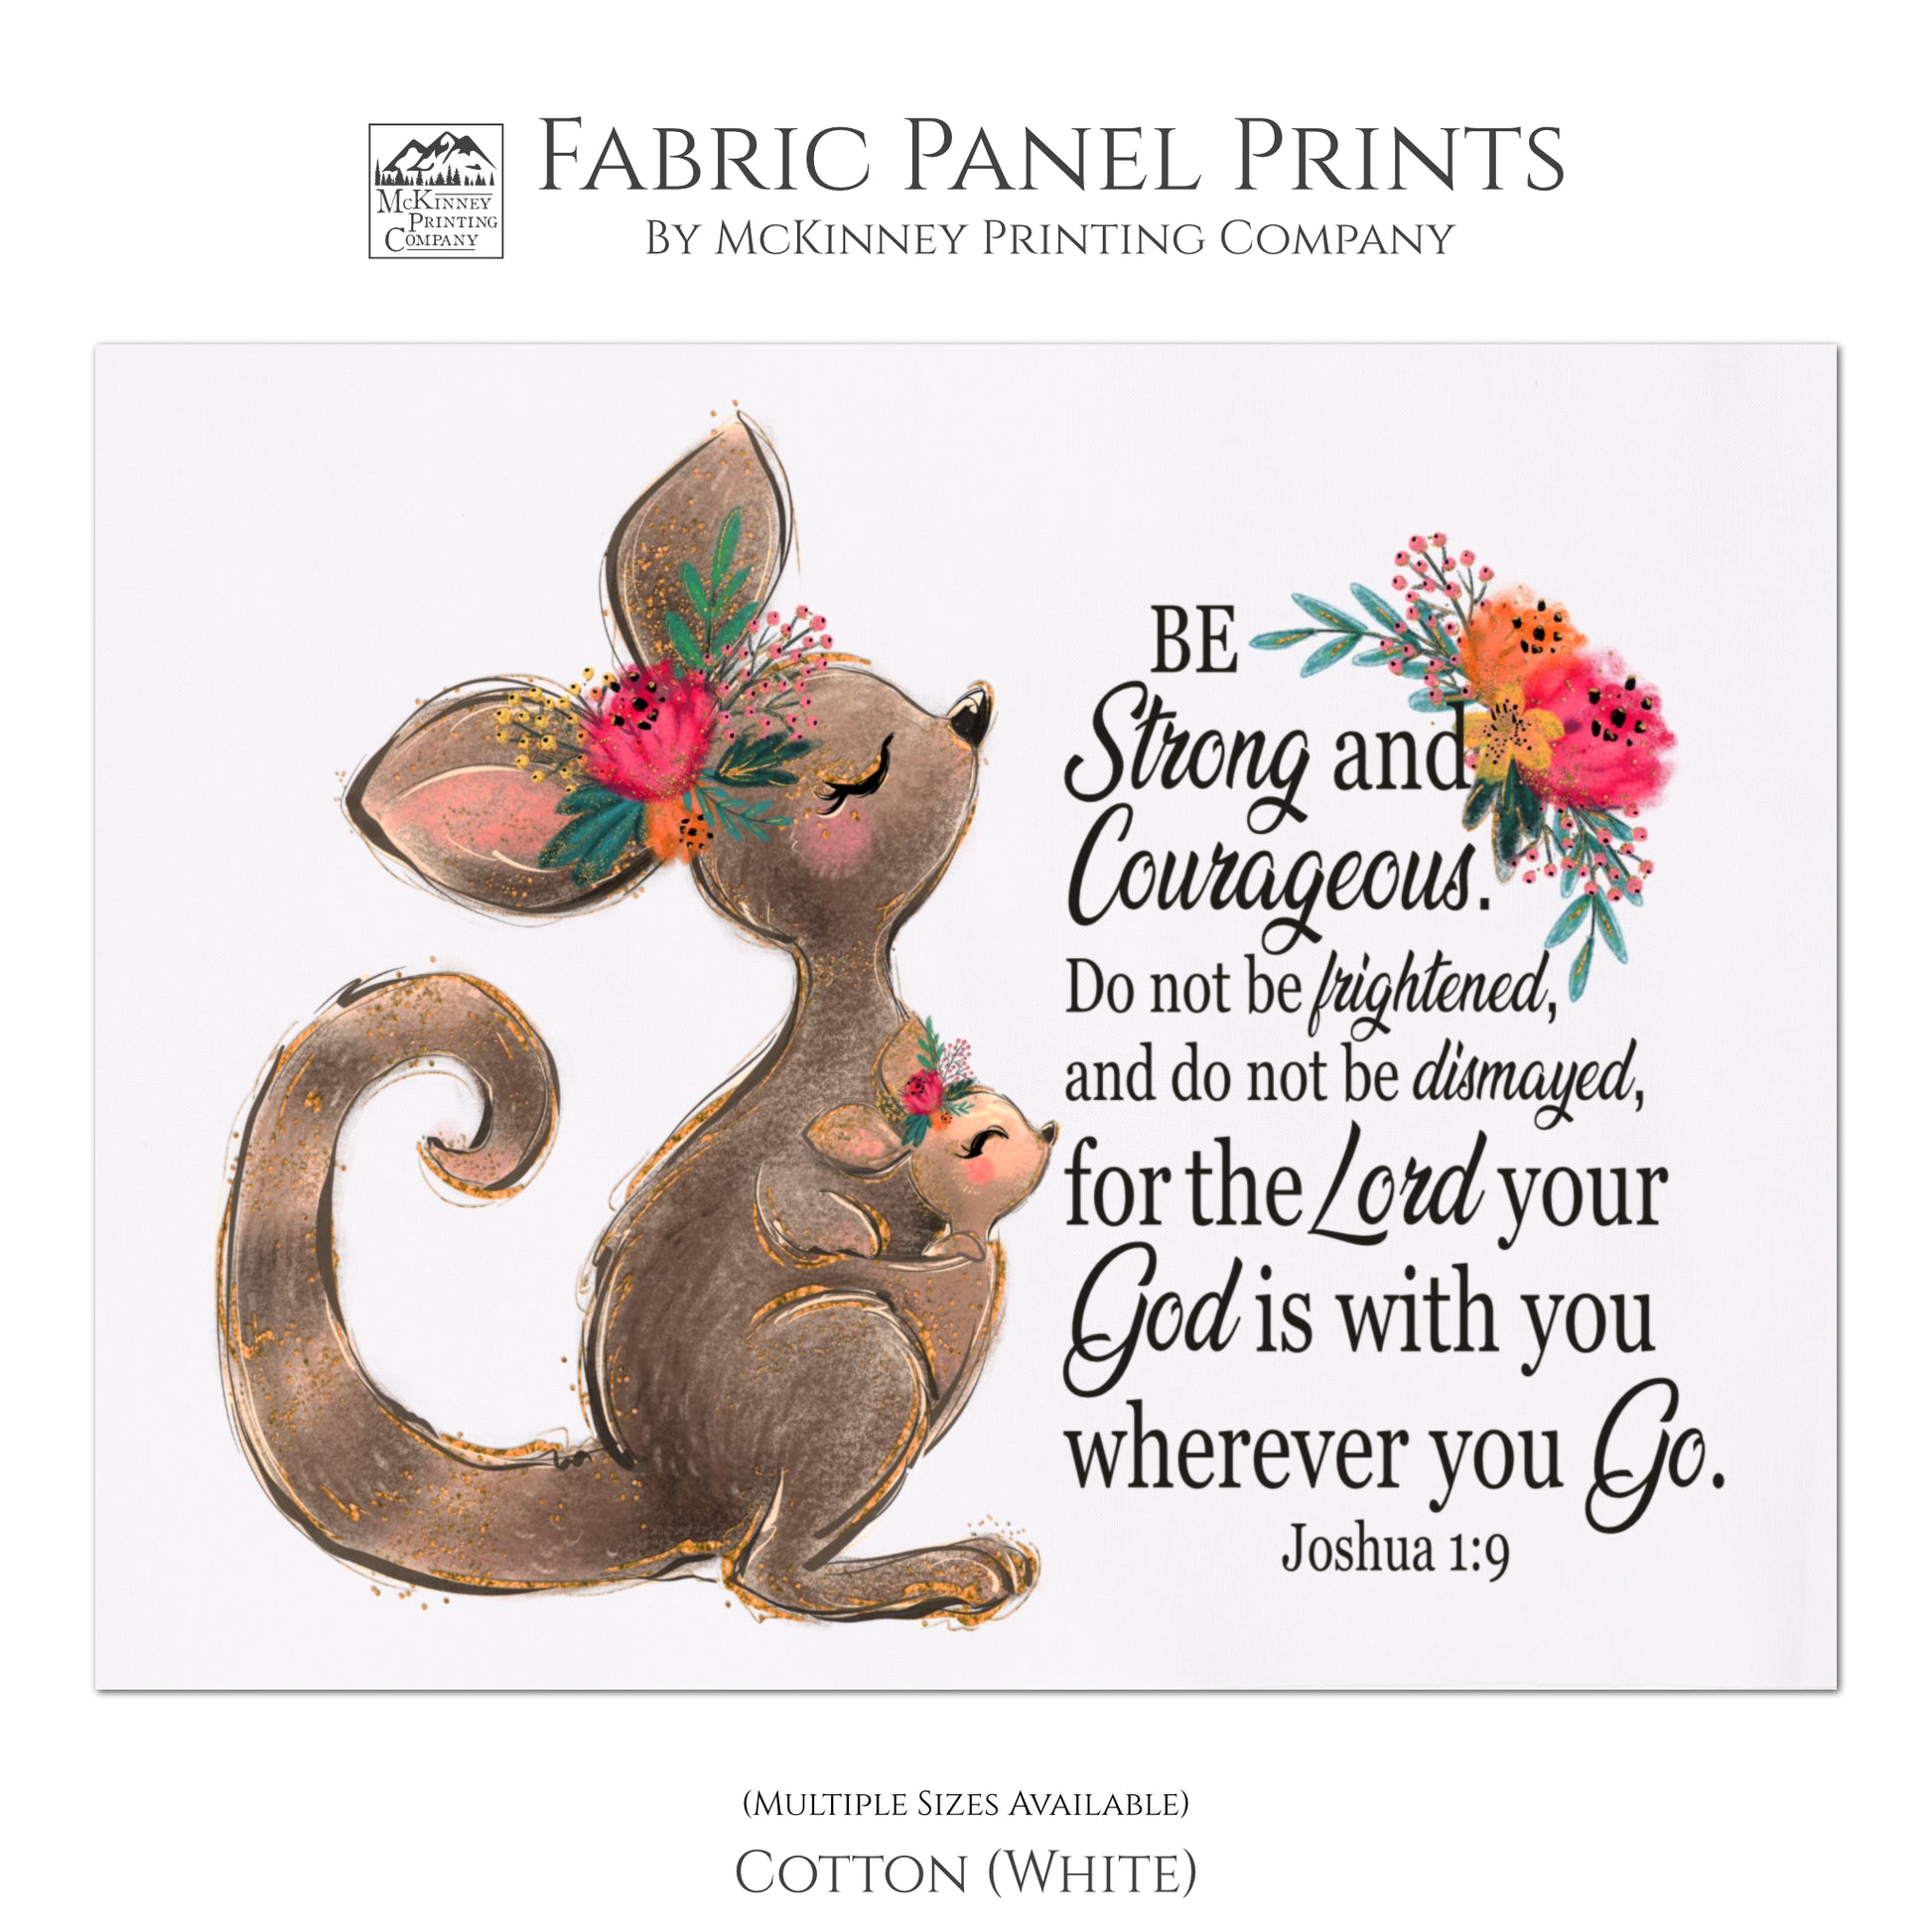 Baby Fabric Panels - Be Strong and Courageous, do not be frightened and do not be dismayed, for the Lord your God is with you wherever you go. - Joshua 1:9 - Fabric Panel Print, Wall Art, Baby Quilt - Cotton, White